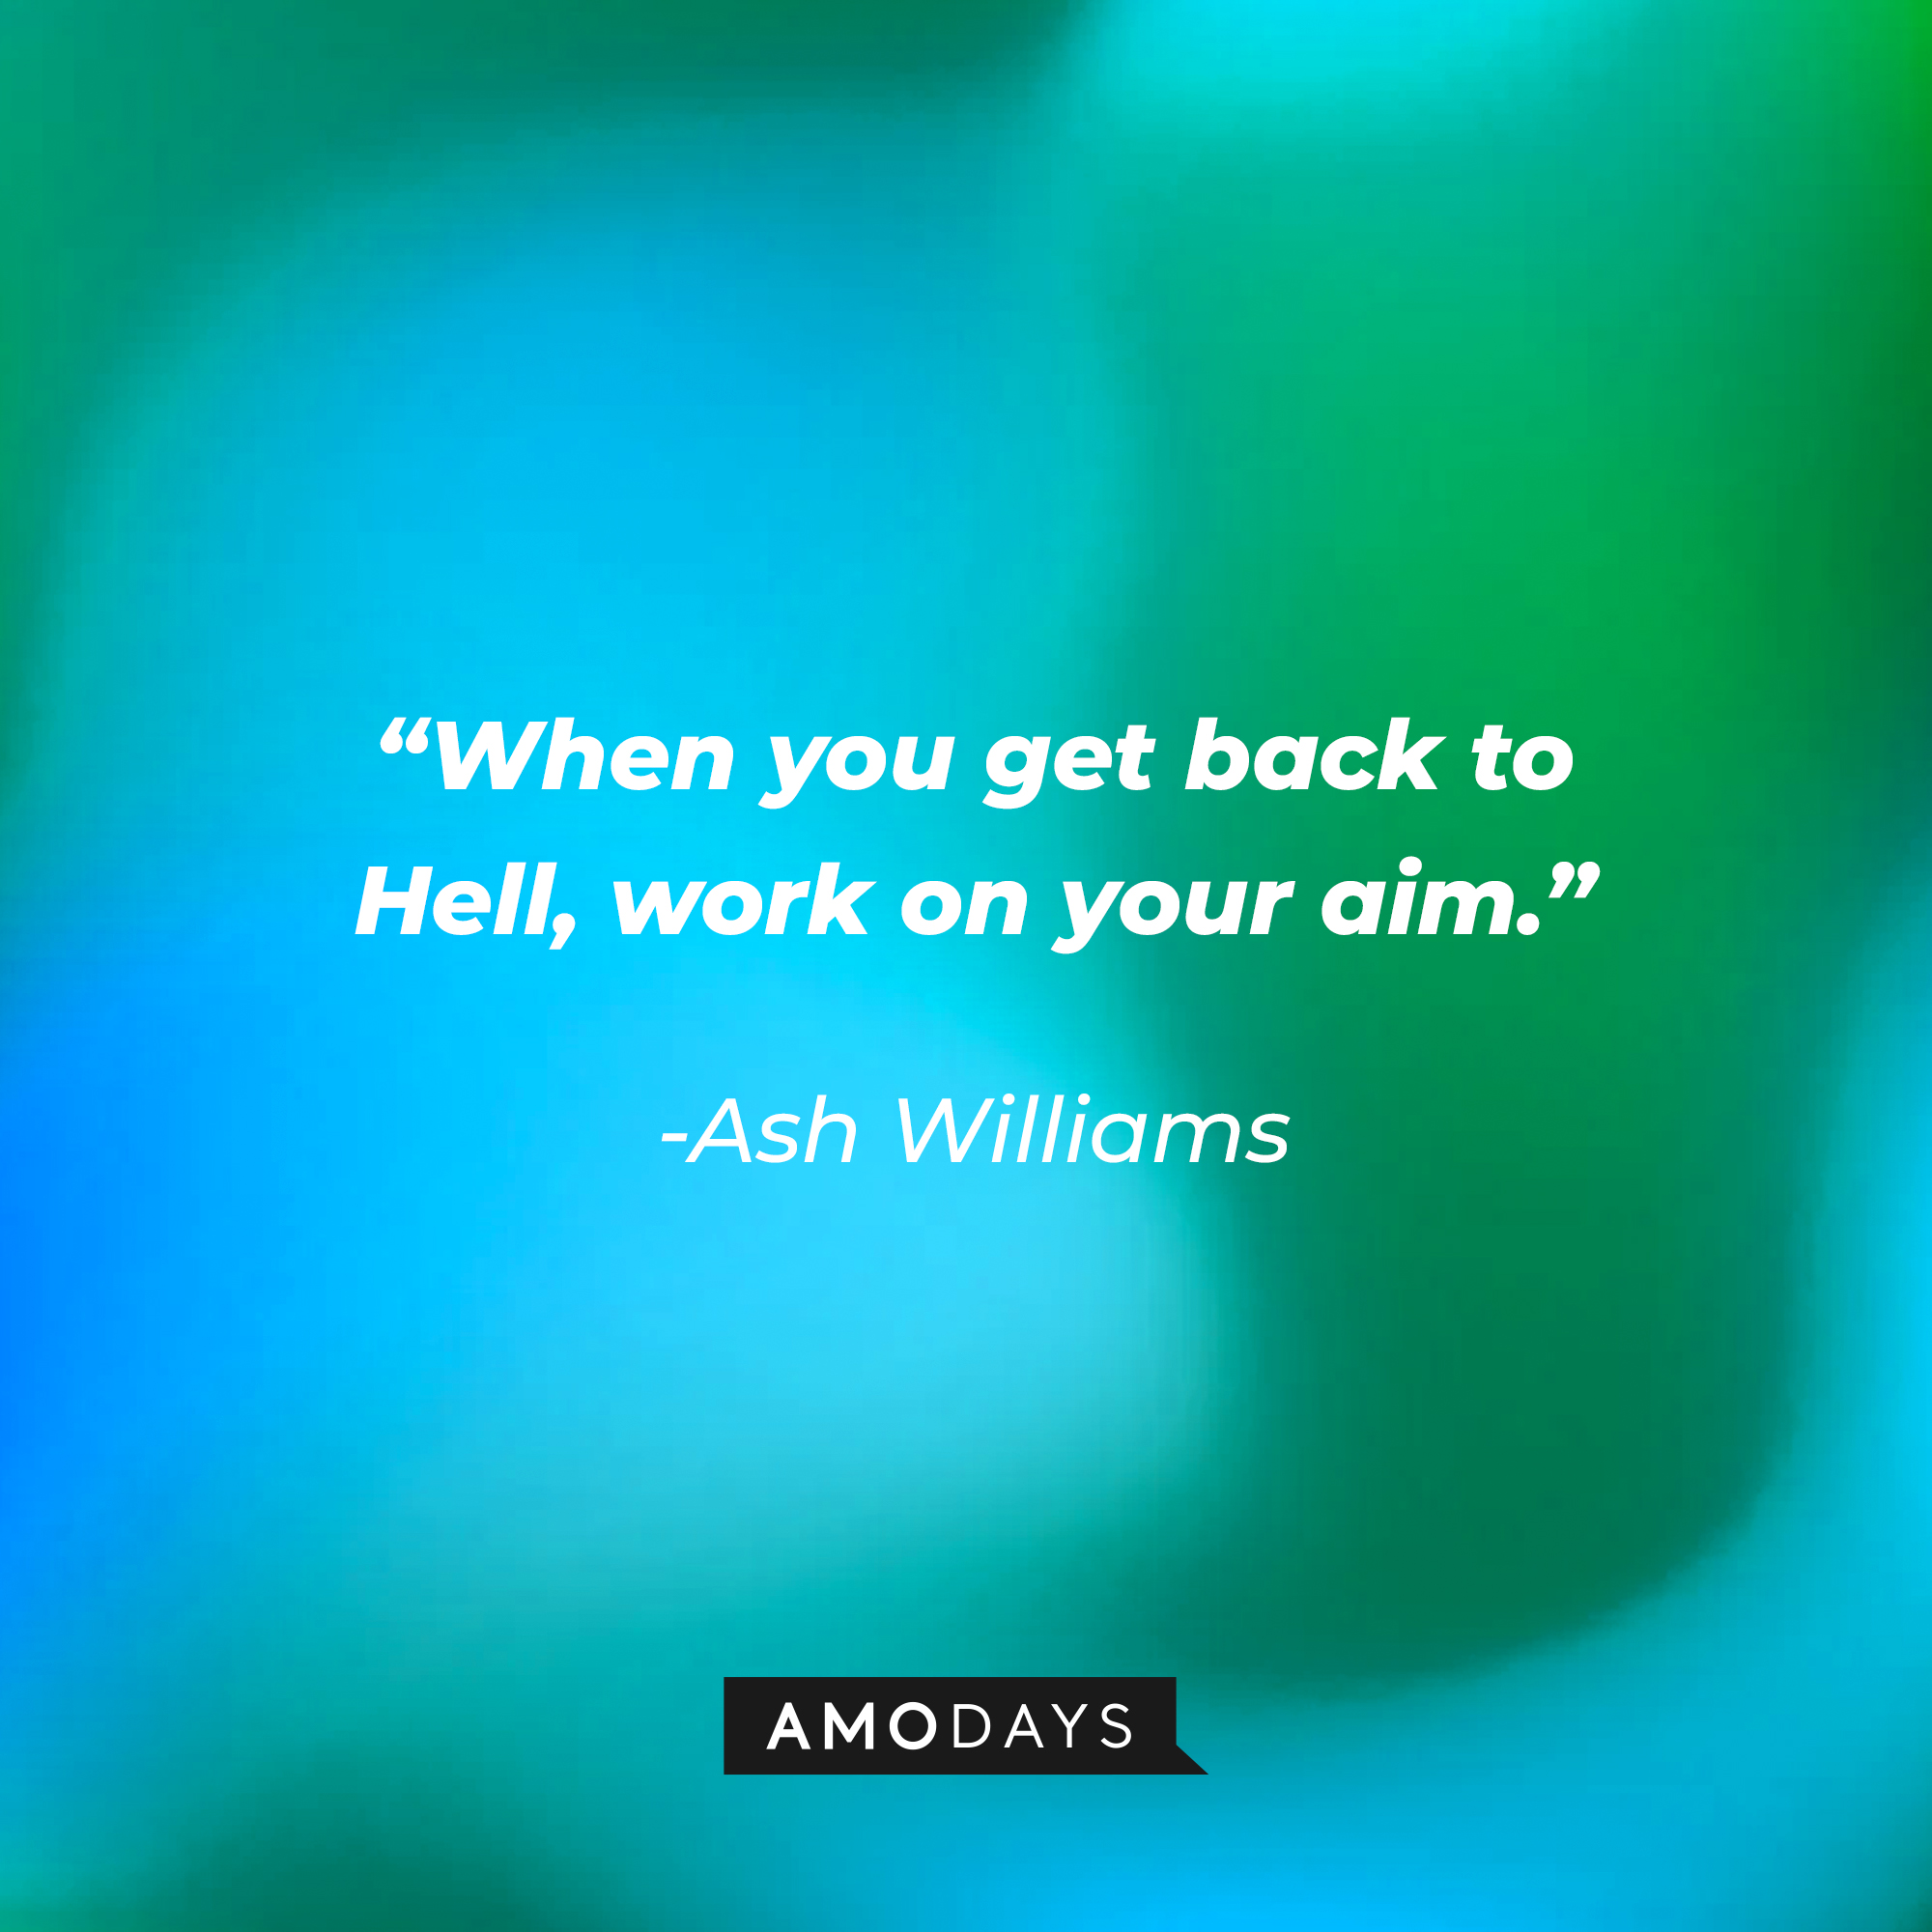 Ash Williams' quote:  “When you get back to Hell, work on your aim.” | Source: Amodays